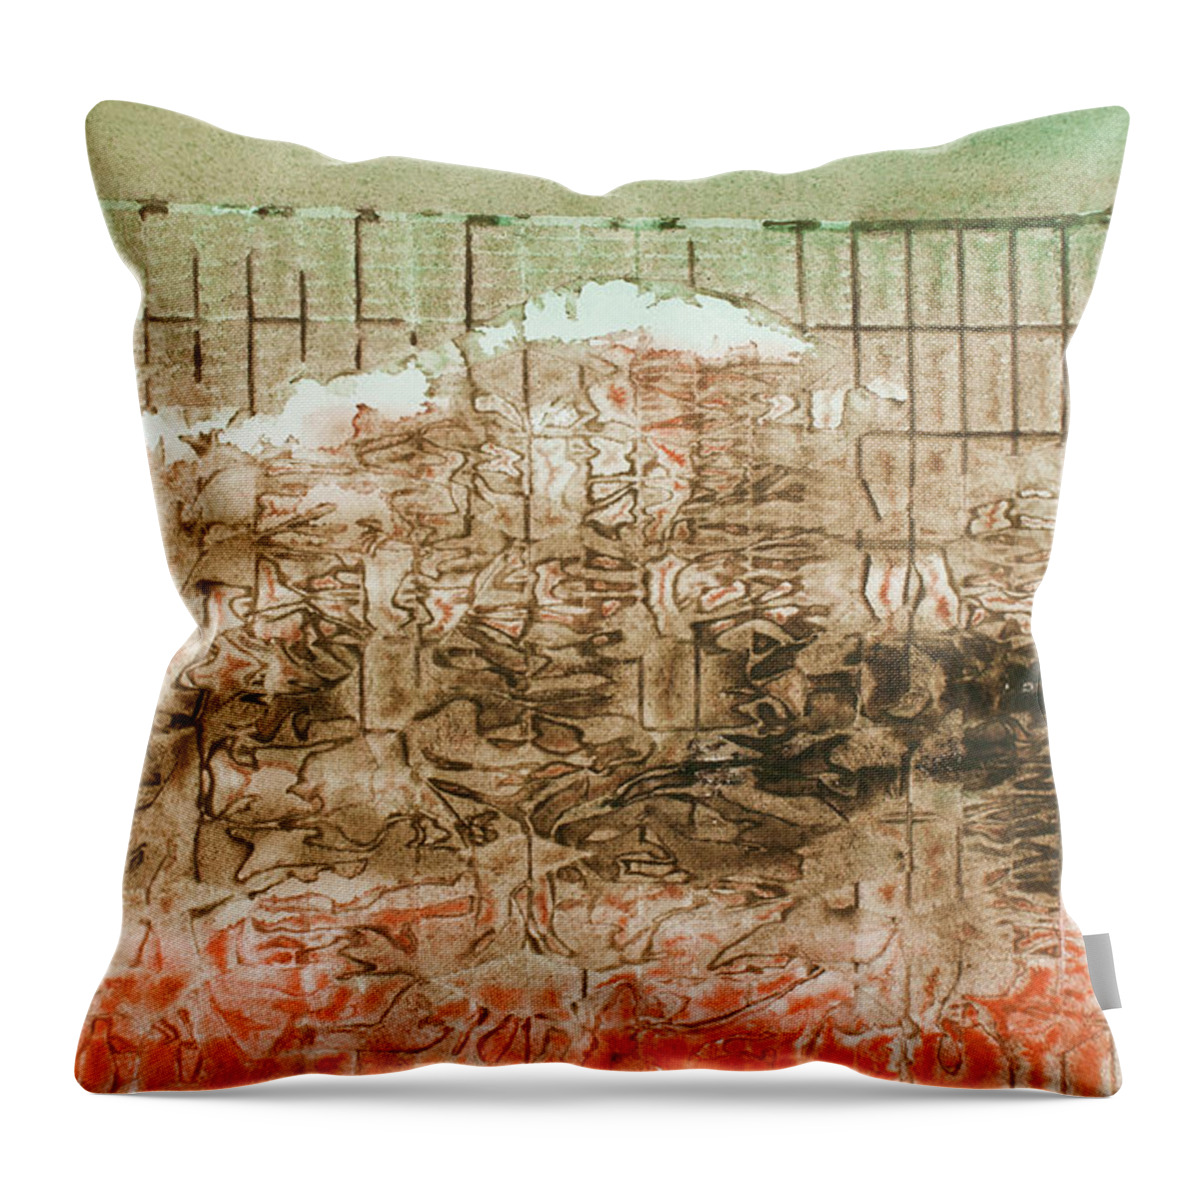 Hans Saele Throw Pillow featuring the painting The Moose by Hans Egil Saele